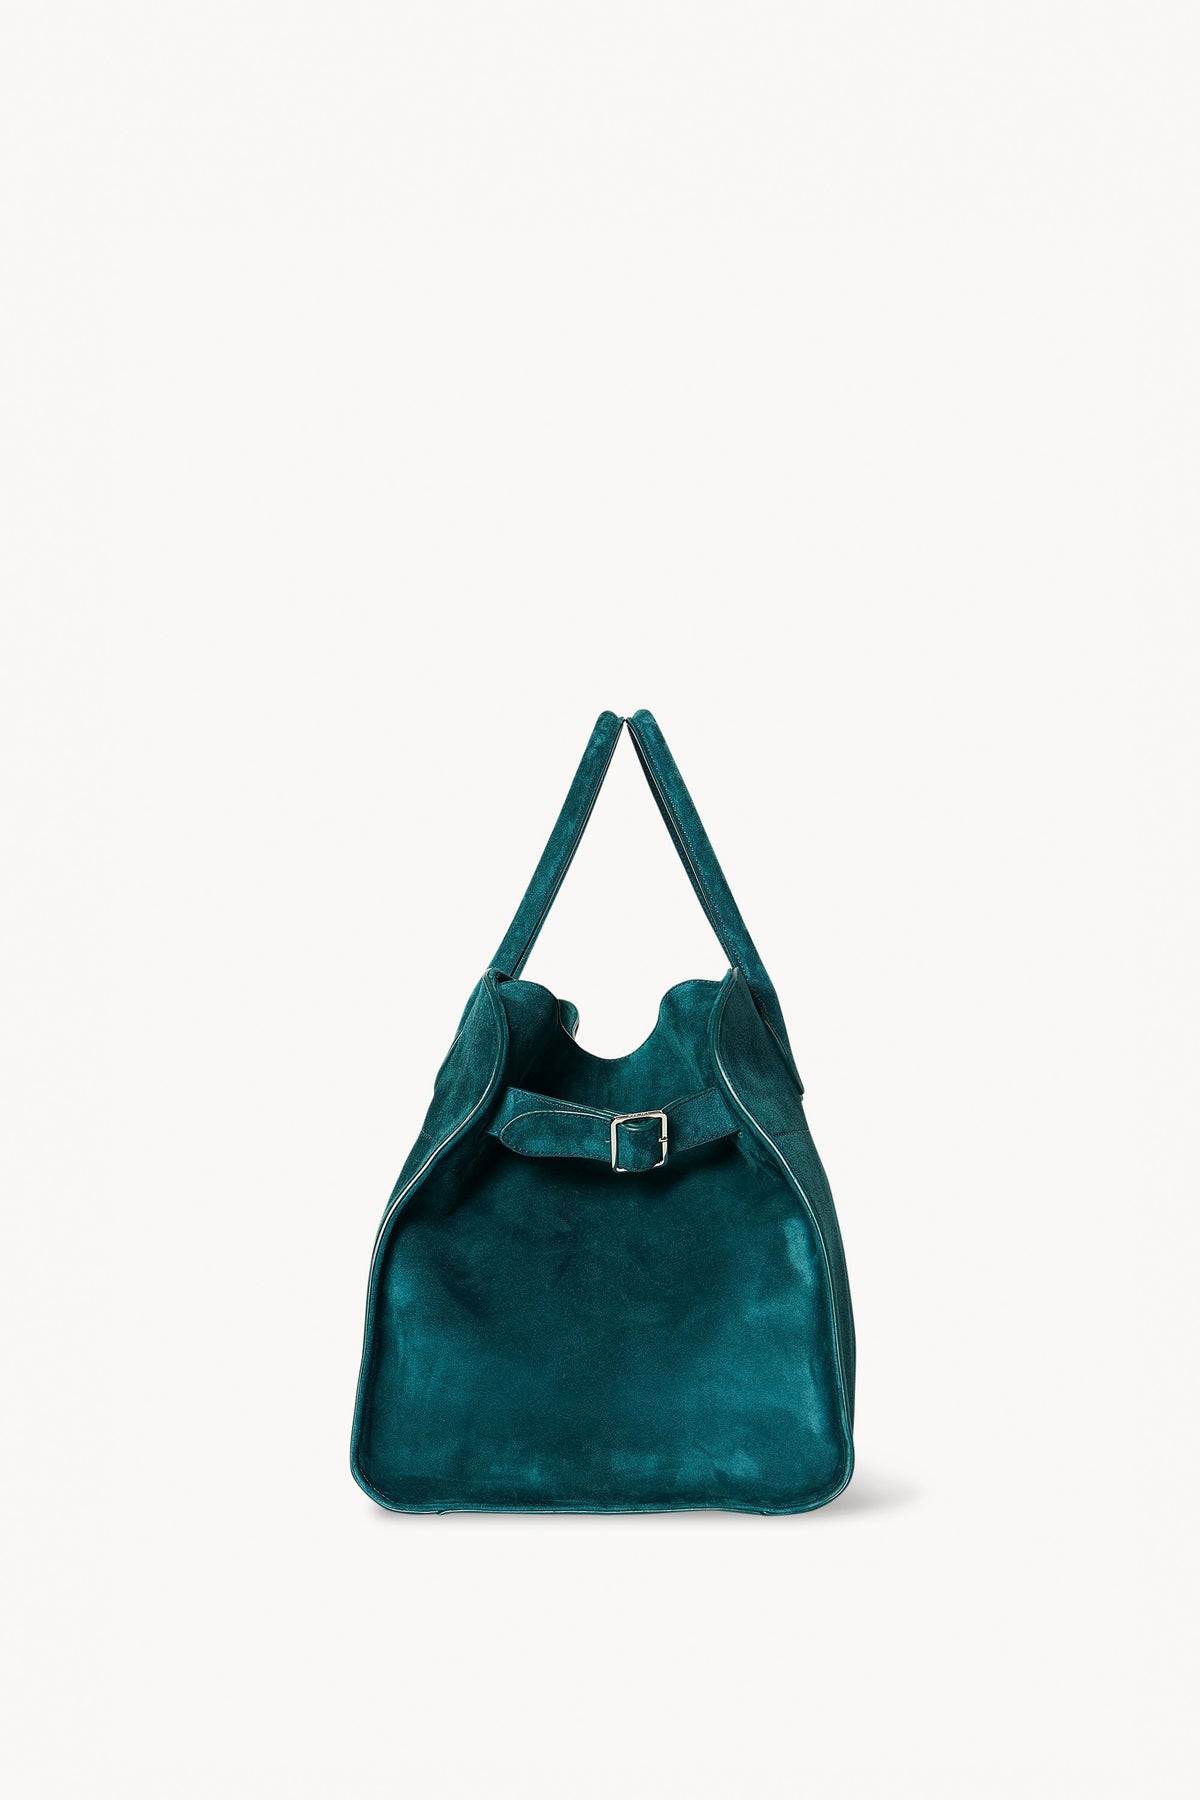 The Row Soft Margaux 15 Suede Satchel in Blue